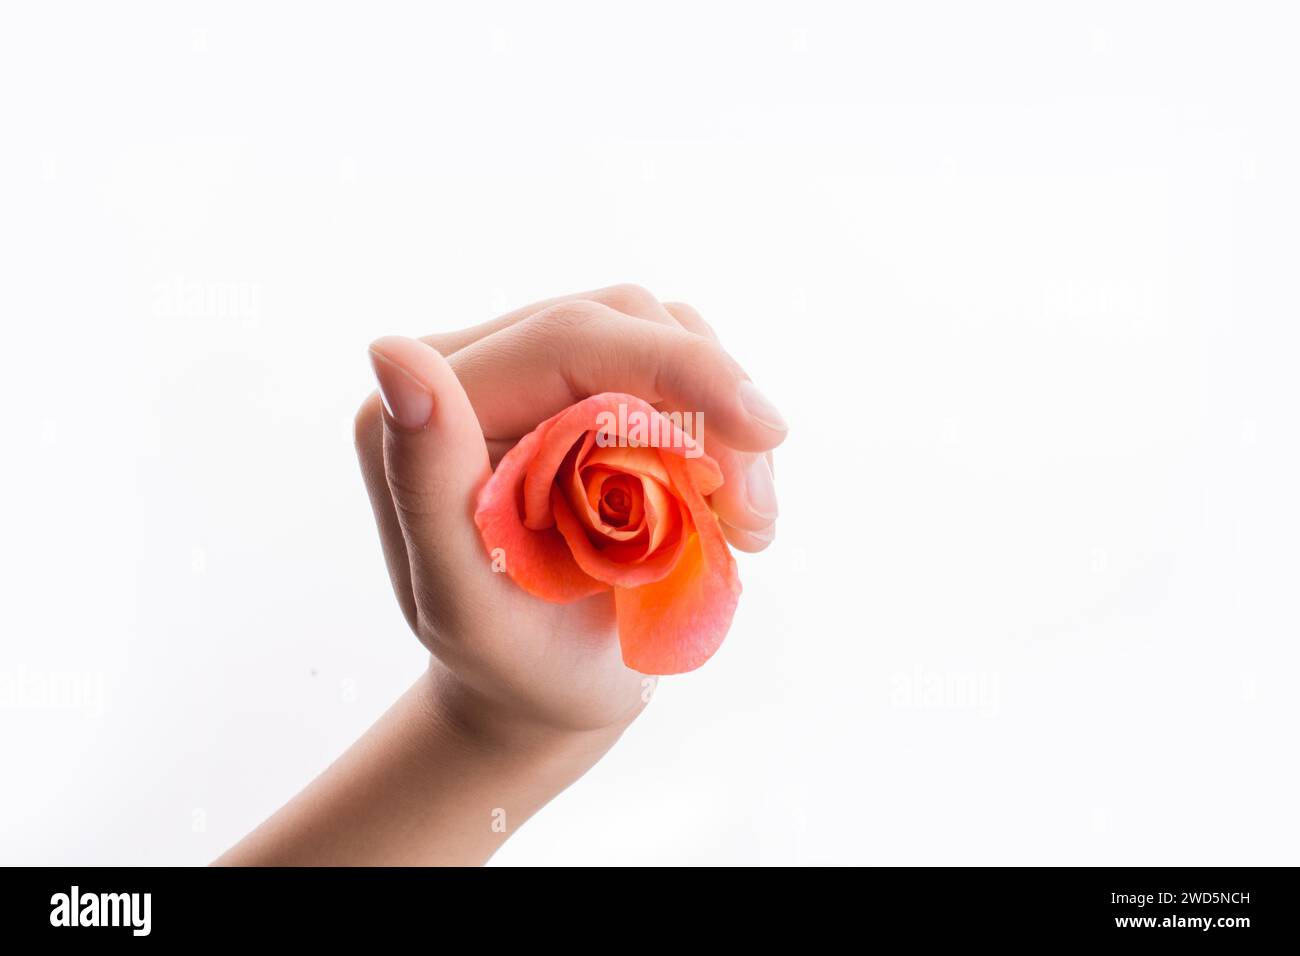 Hand holding an orange rose on a white background Stock Photo